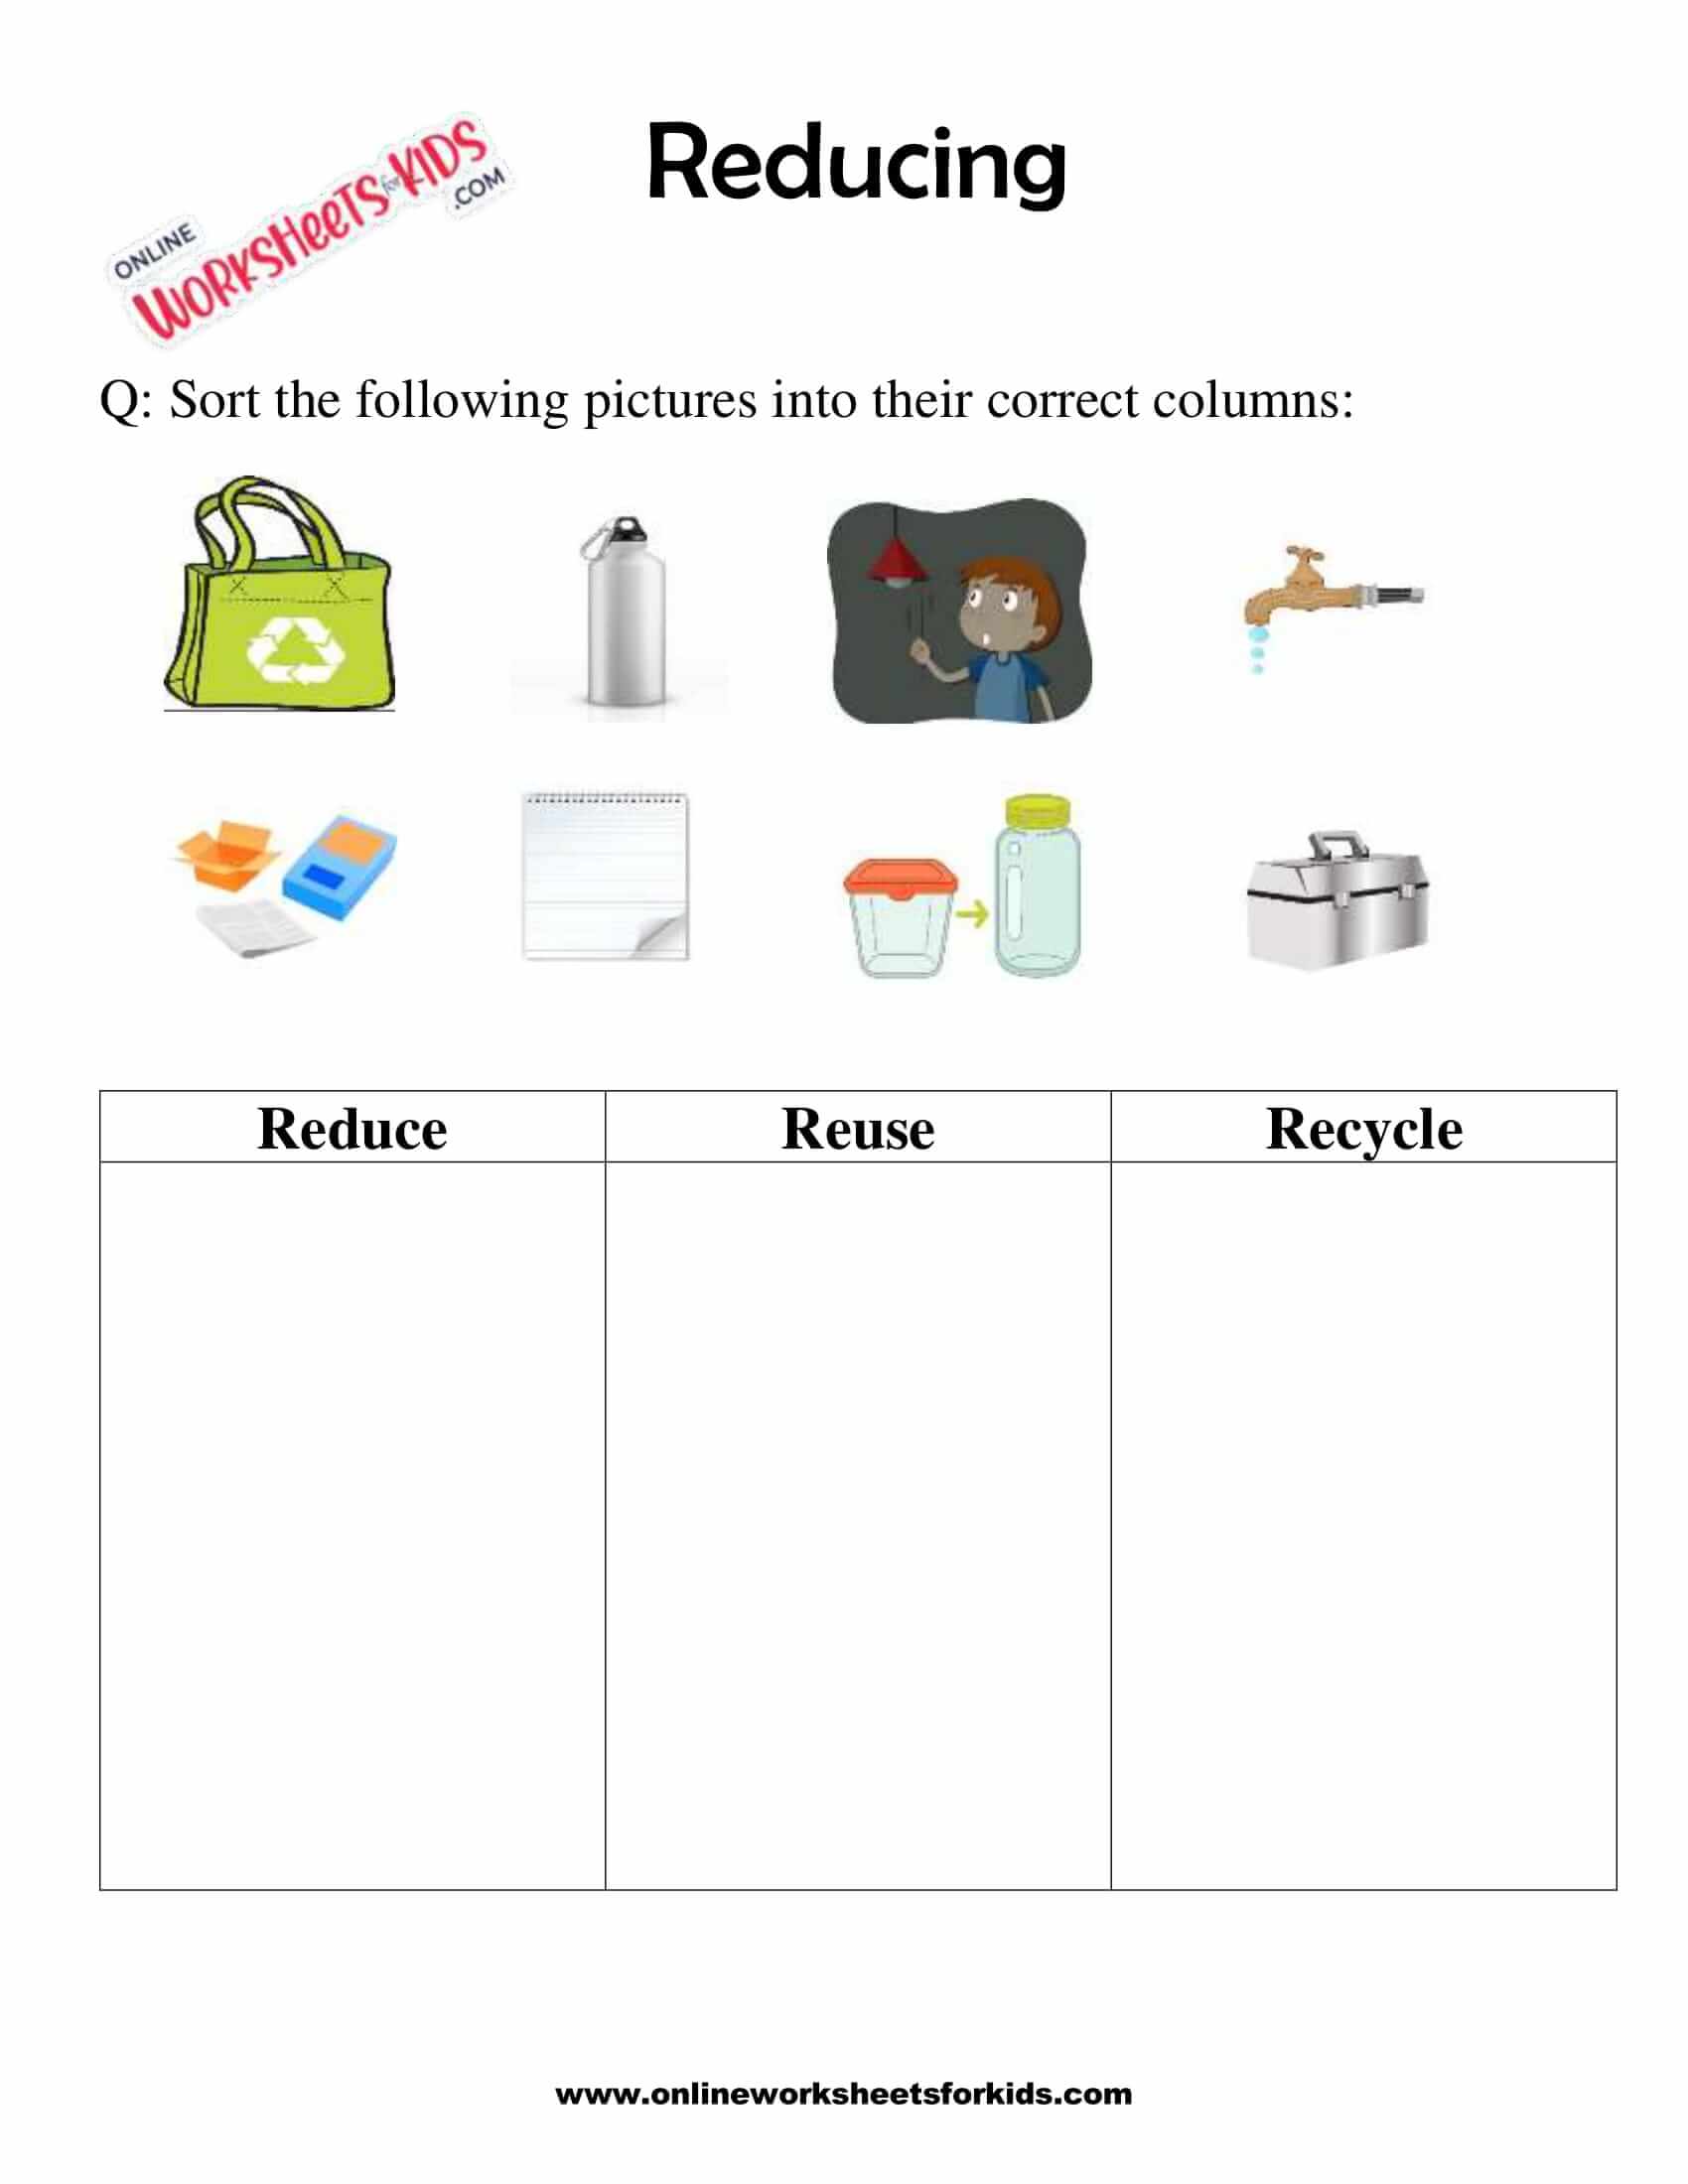 Recycling Worksheets For Kids Reduce Reuse Recycle Worksheets Images